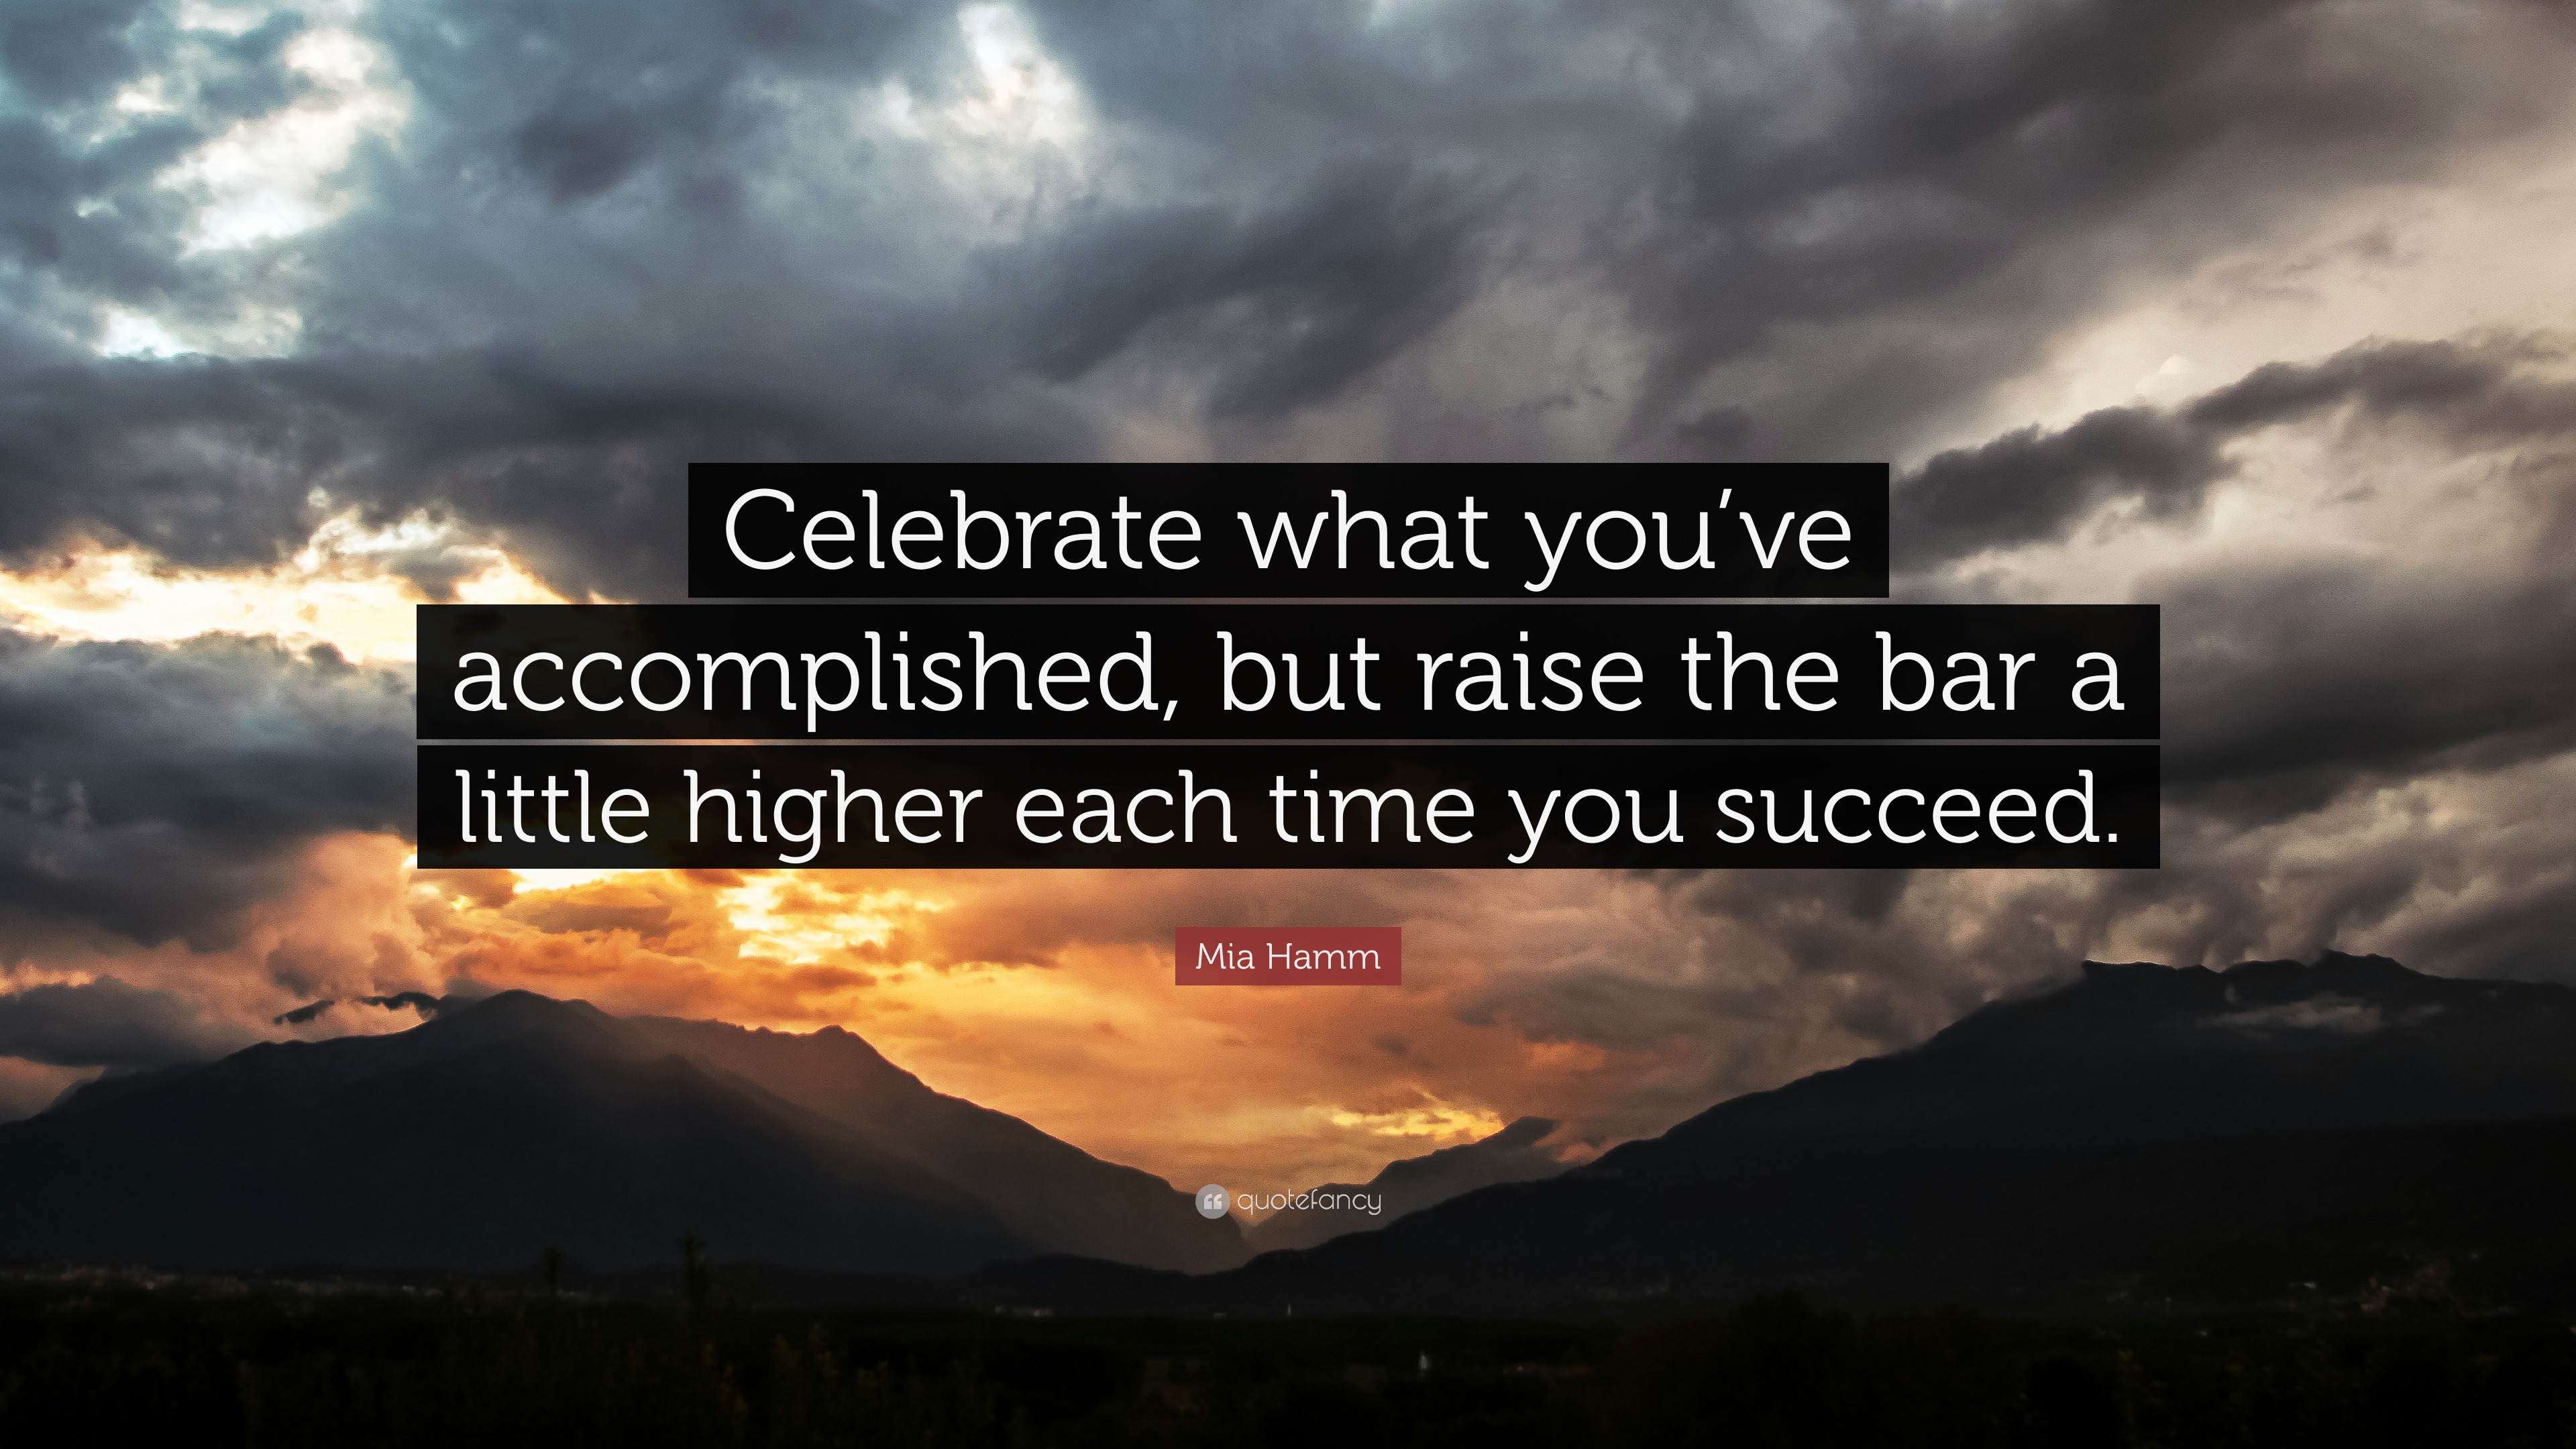 Mia Hamm Quote: “Celebrate what you’ve accomplished, but raise the bar